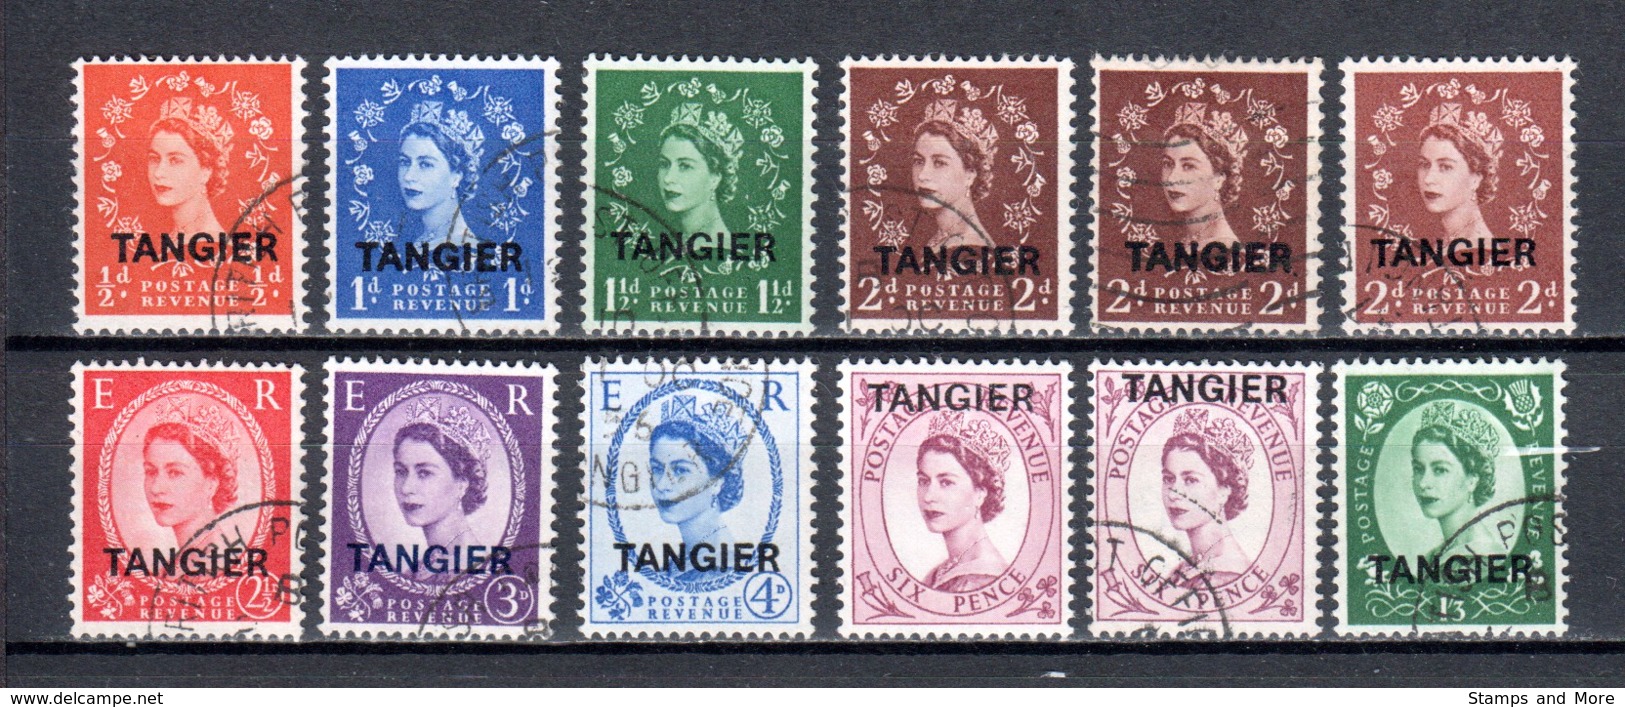 Great Britain - TANGIER 1952 Canceled - Morocco Agencies / Tangier (...-1958)